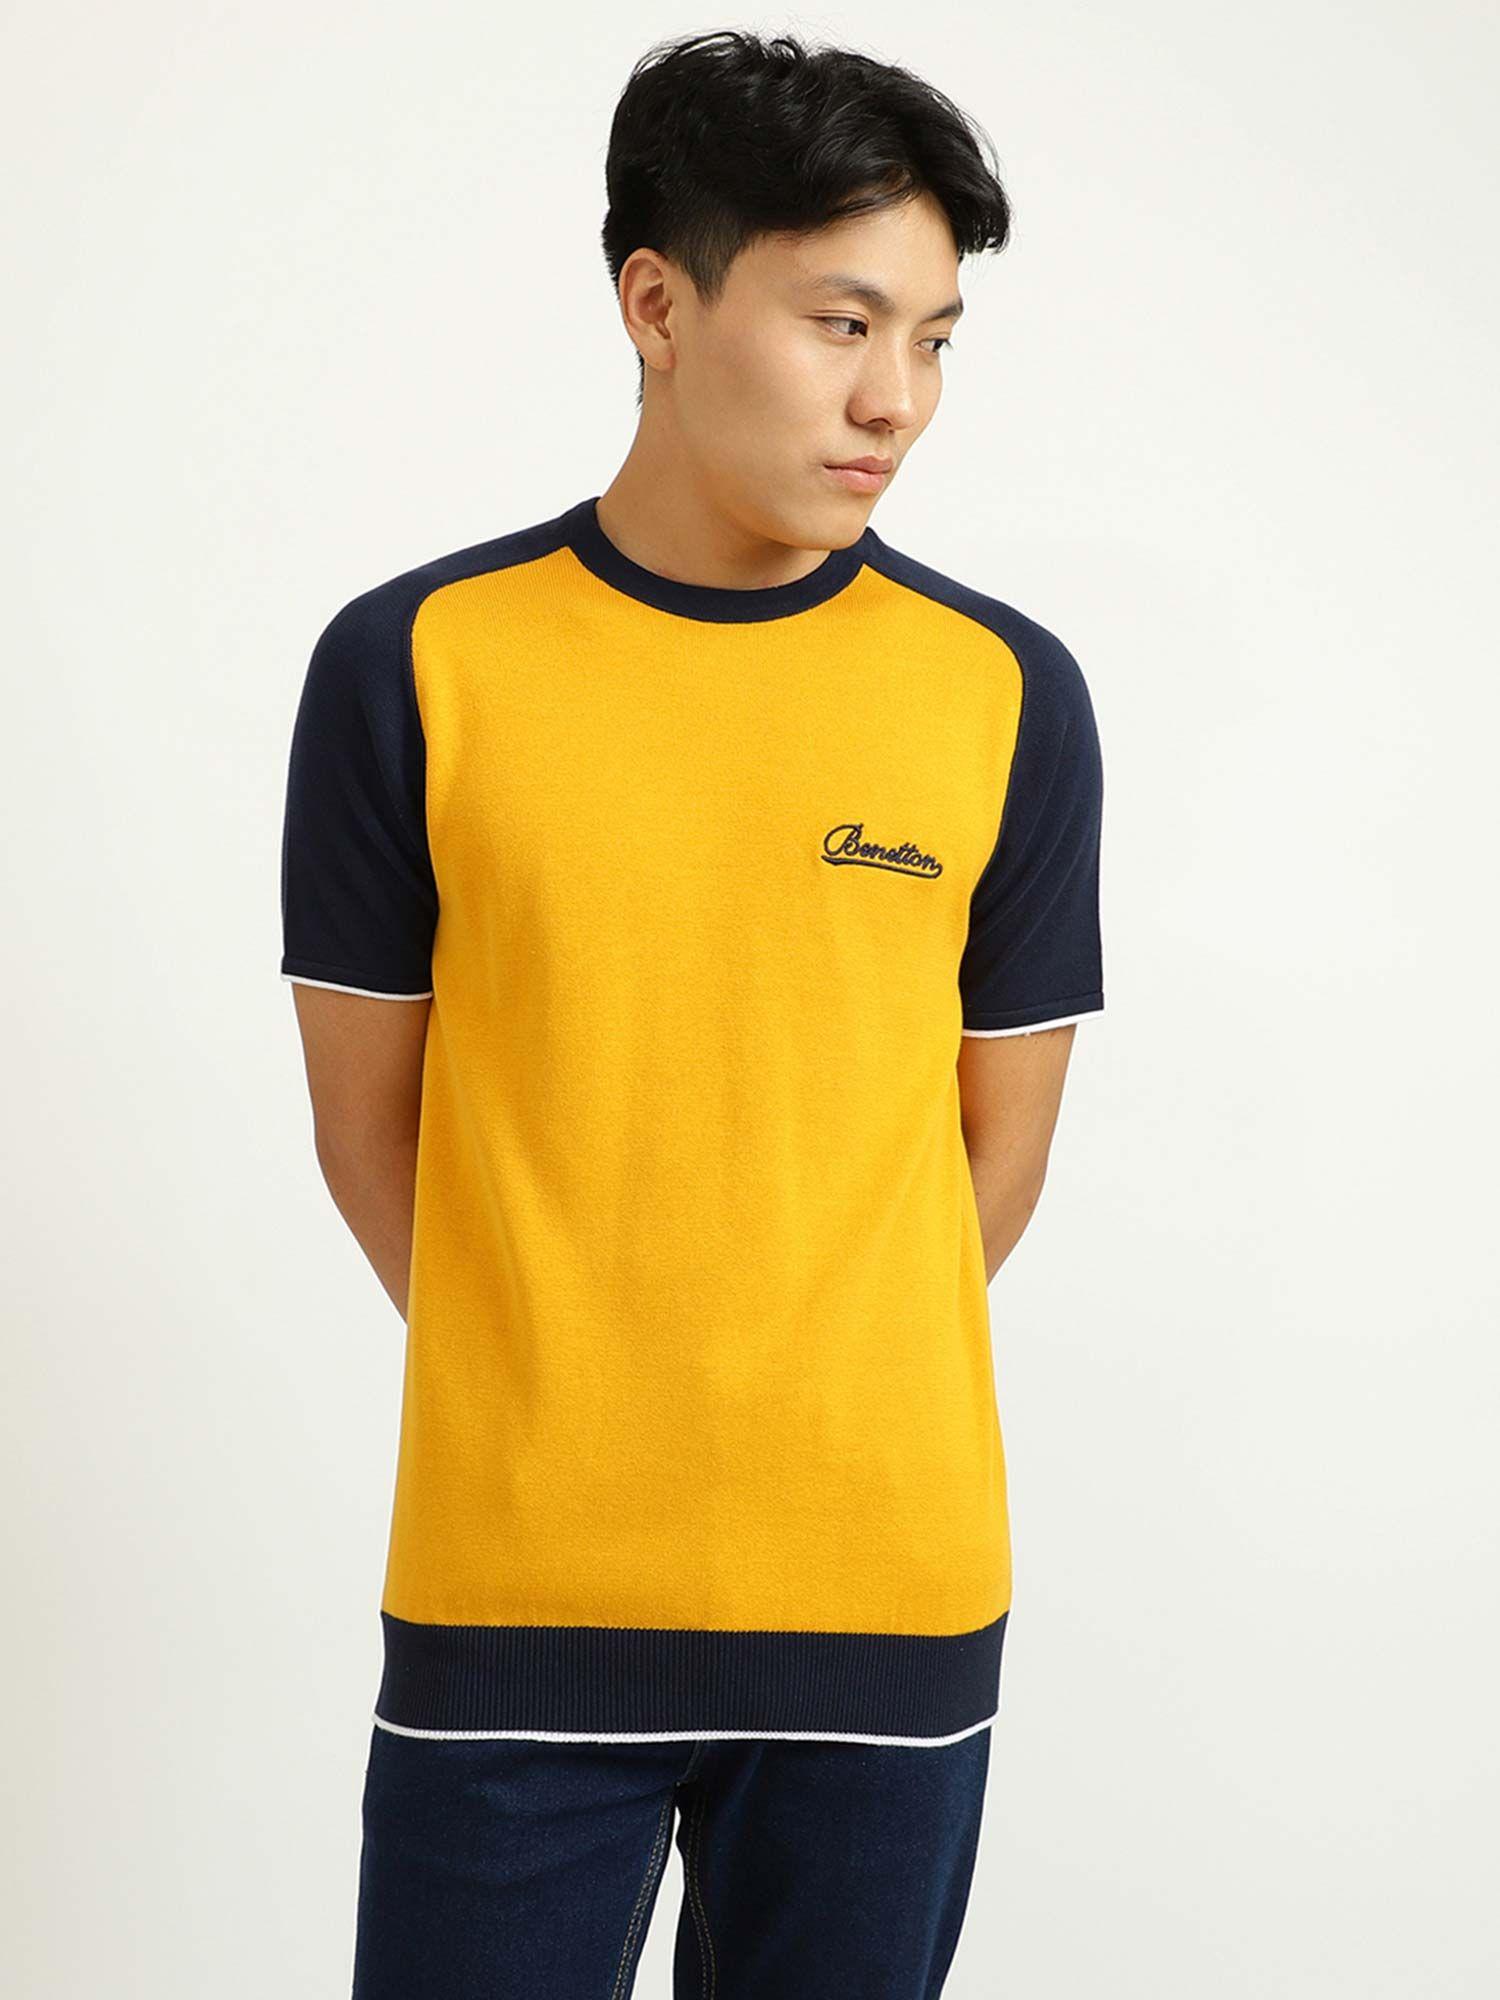 yellow-and-navy-blue-t-shirt